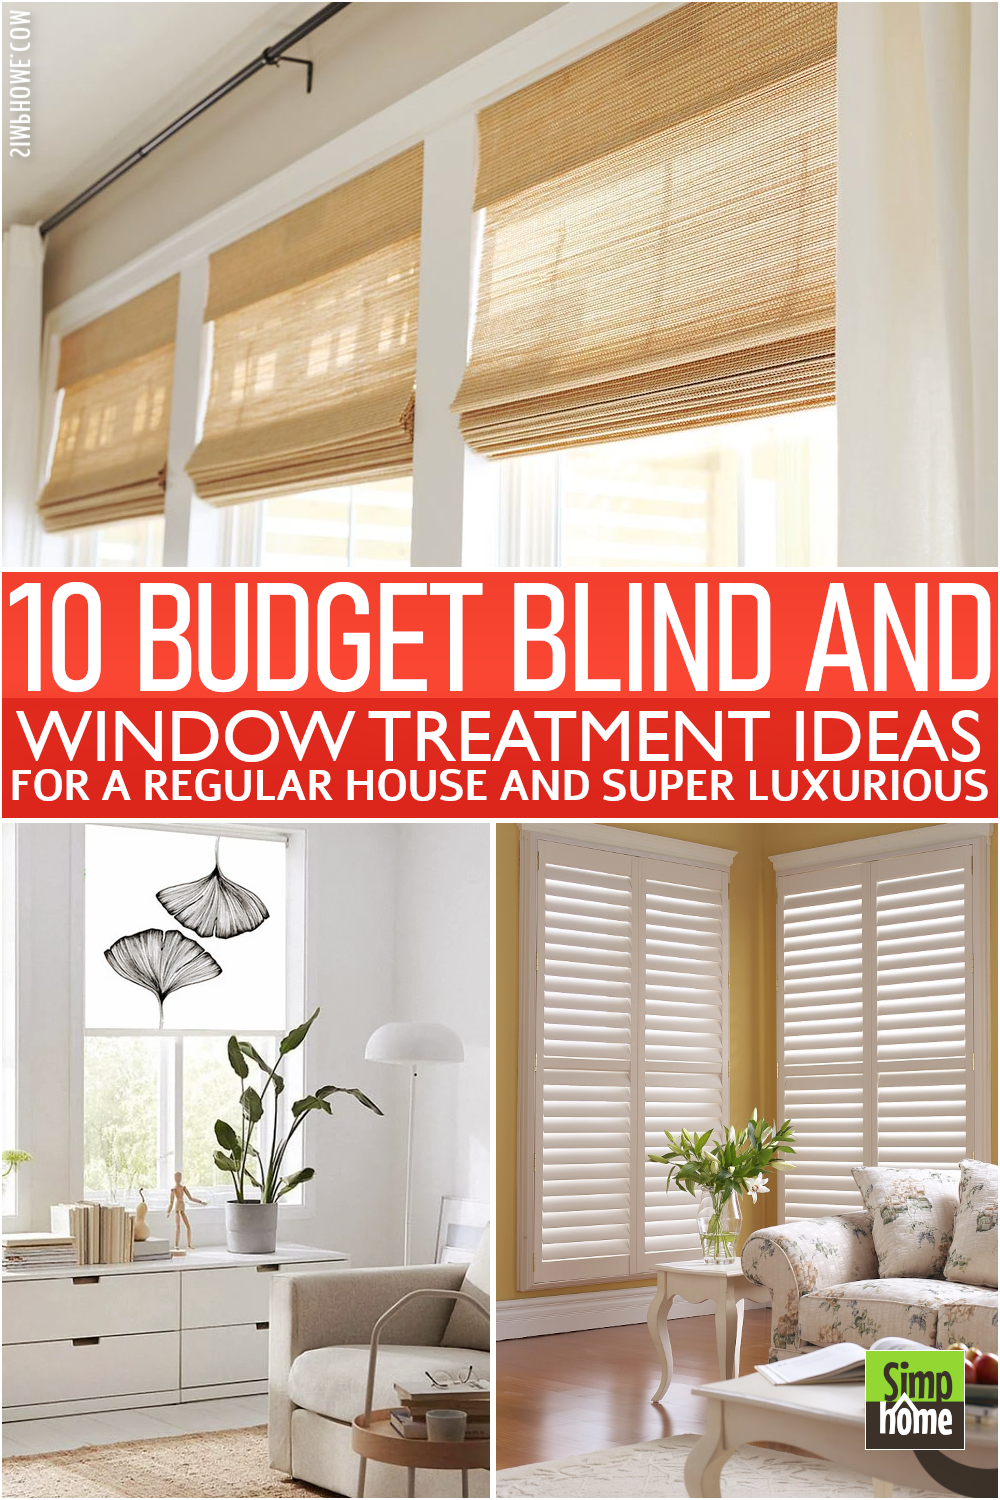 Poster image for 10 budget blind-window treatment from Simphome